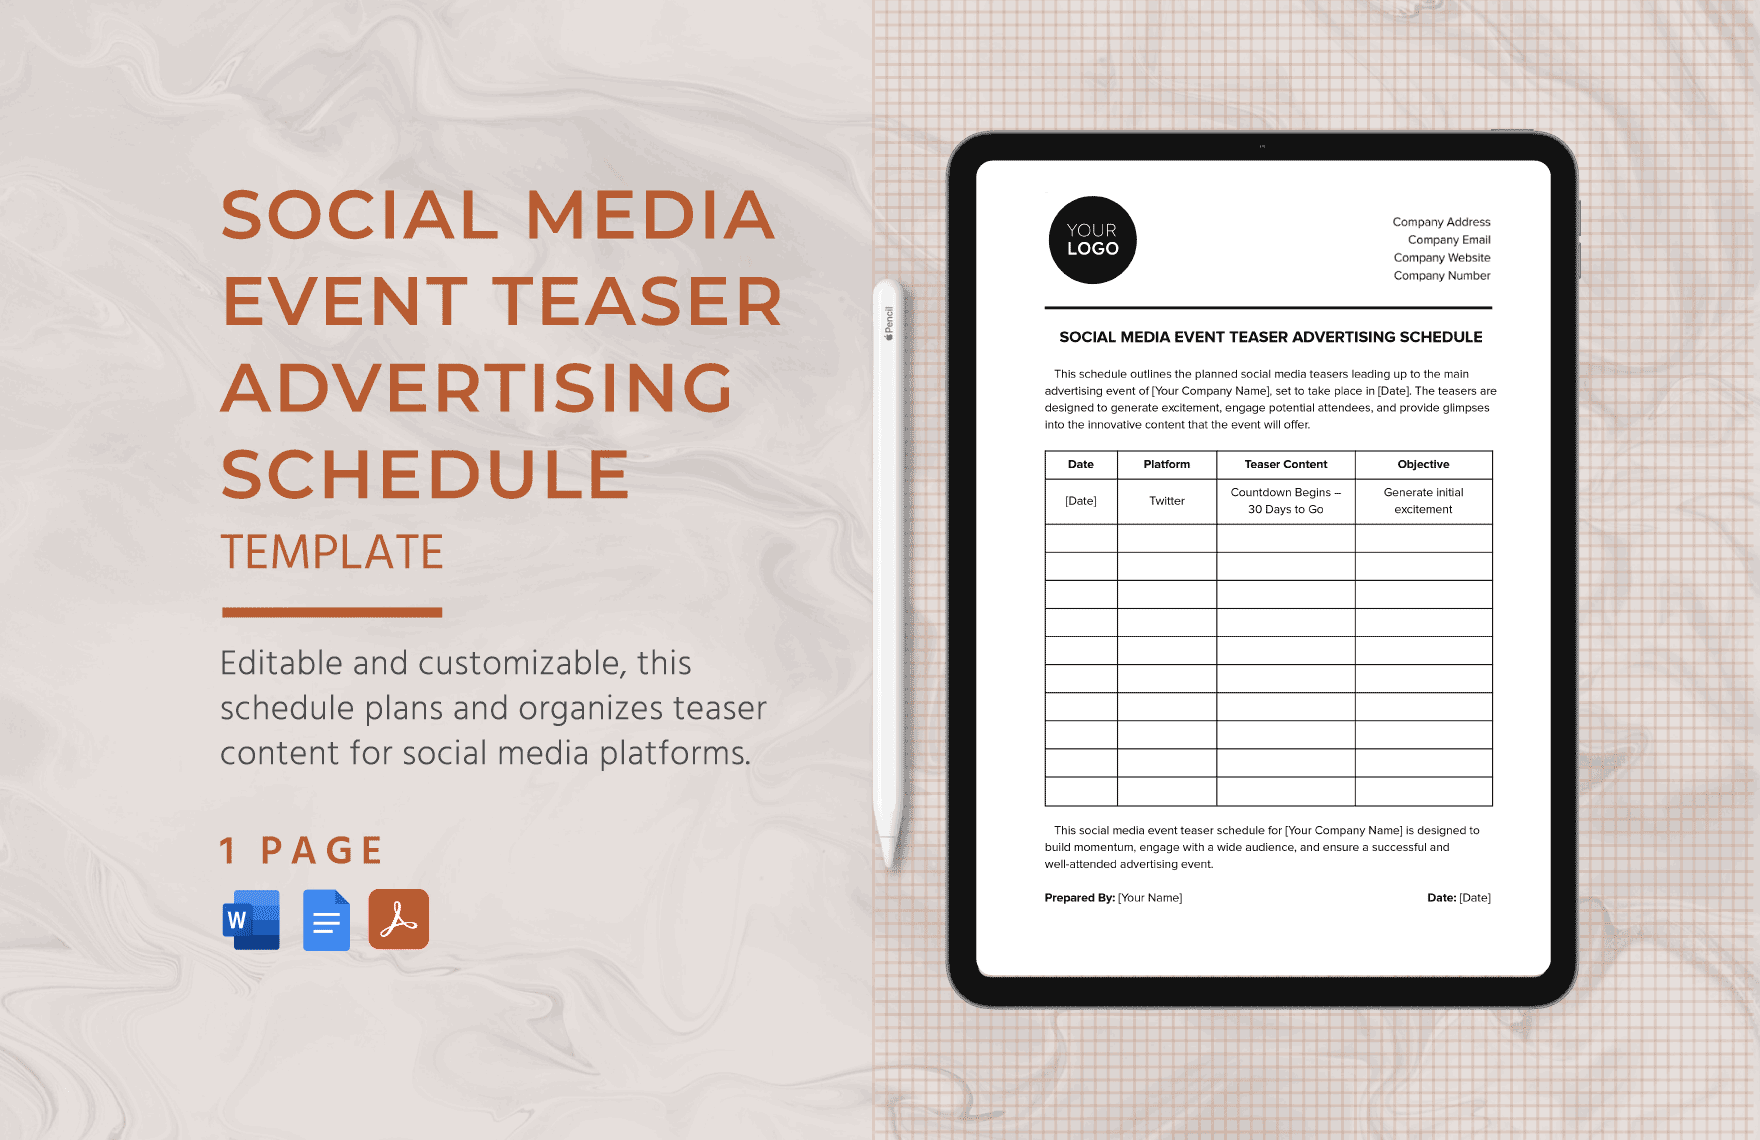 Social Media Event Teaser Advertising Schedule Template